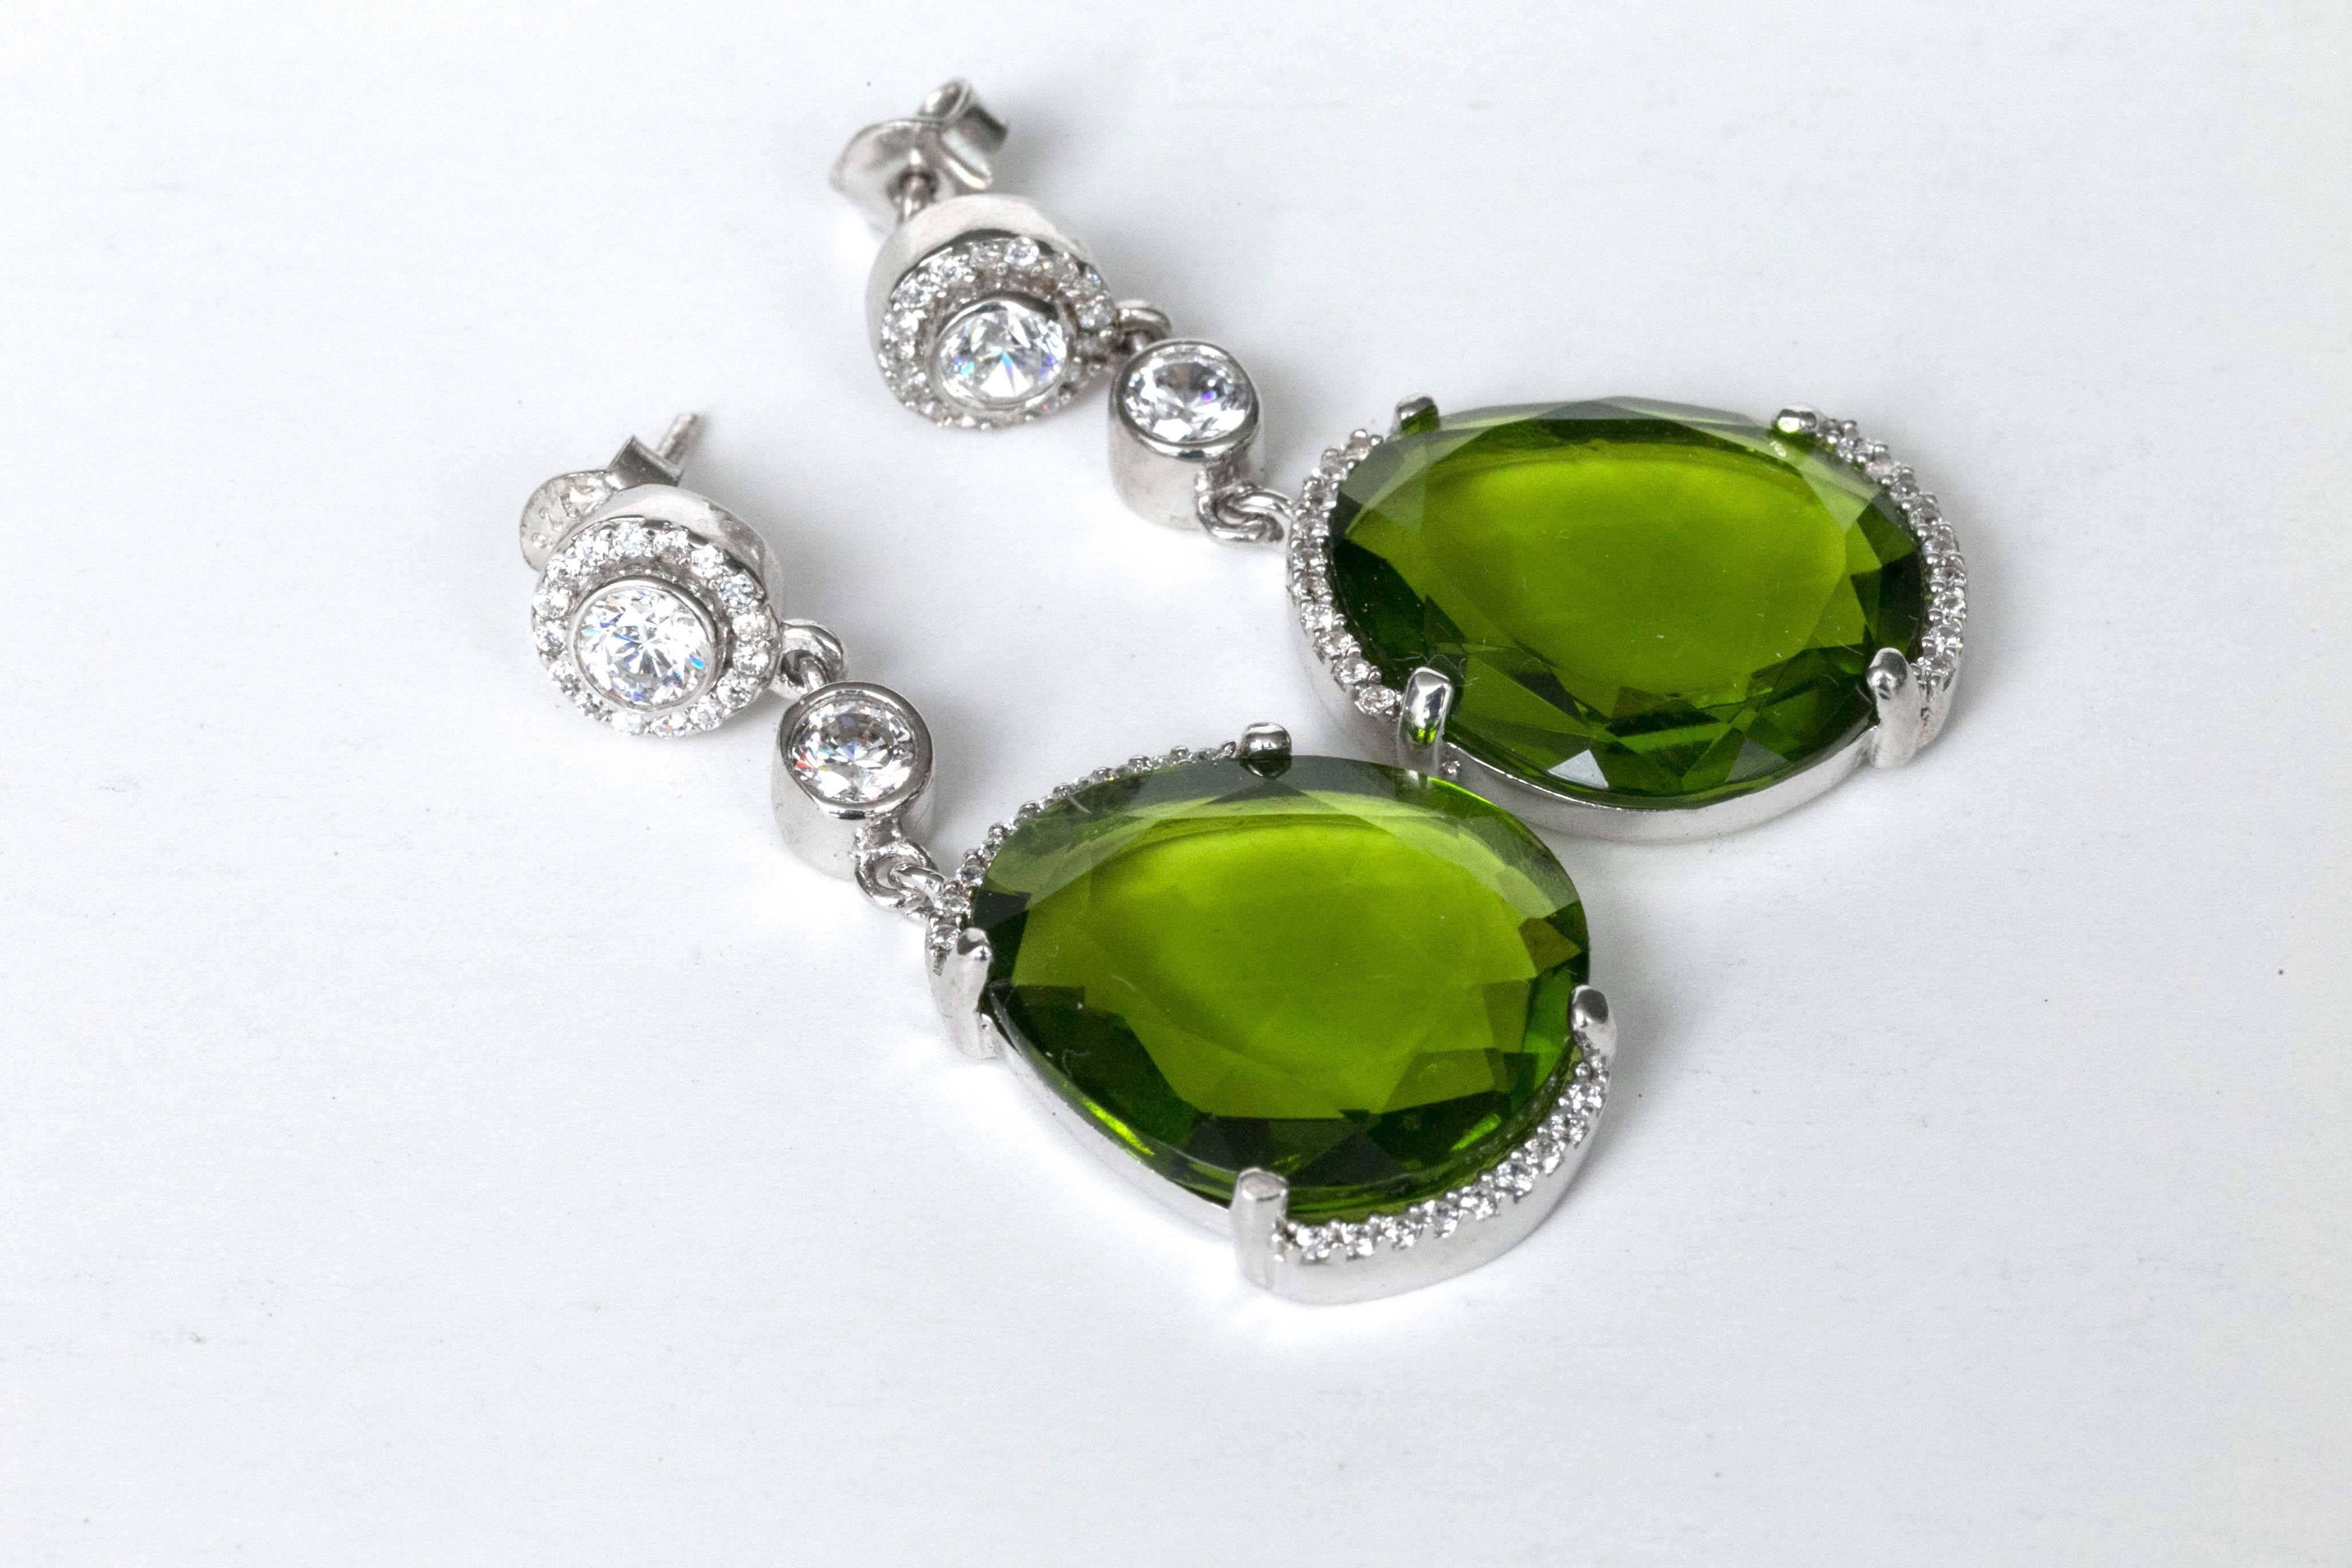 Hollywood Regency Beautiful Swarovski Crystal and Waterdrop Peridot Necklace and Earrings Set For Sale